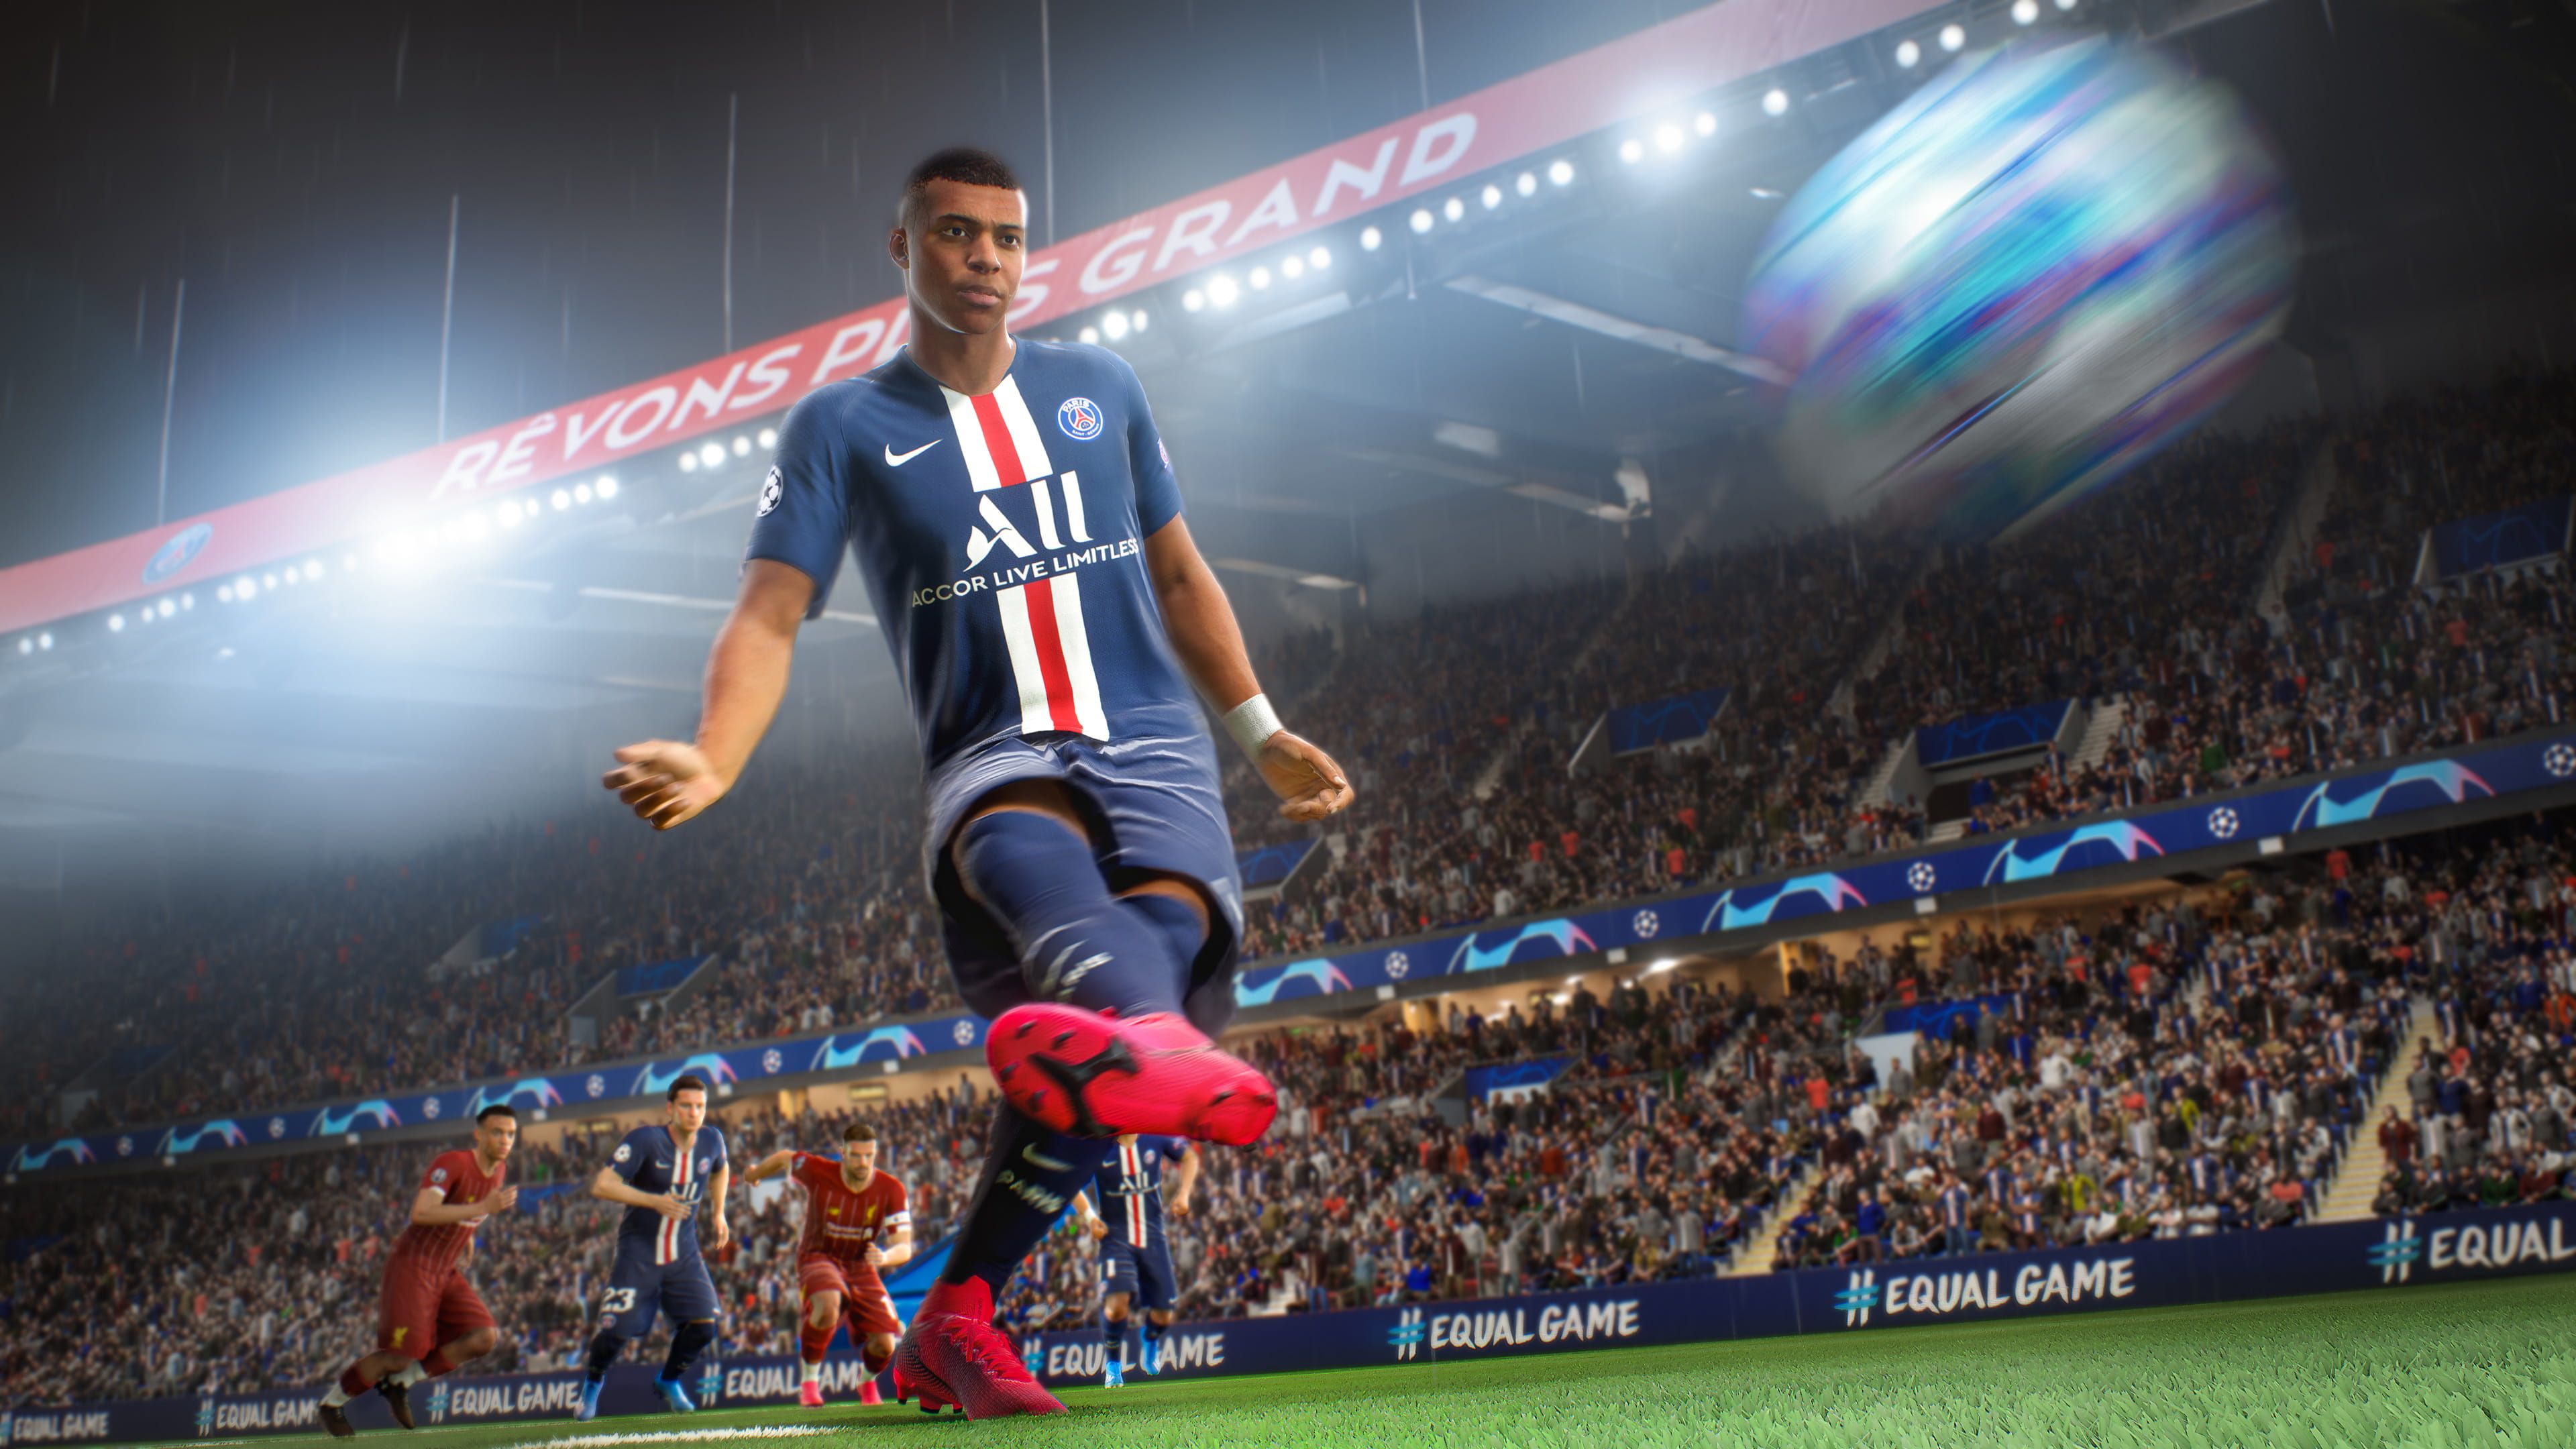 FIFA 21 for PC will be the PS4 and Xbox One version